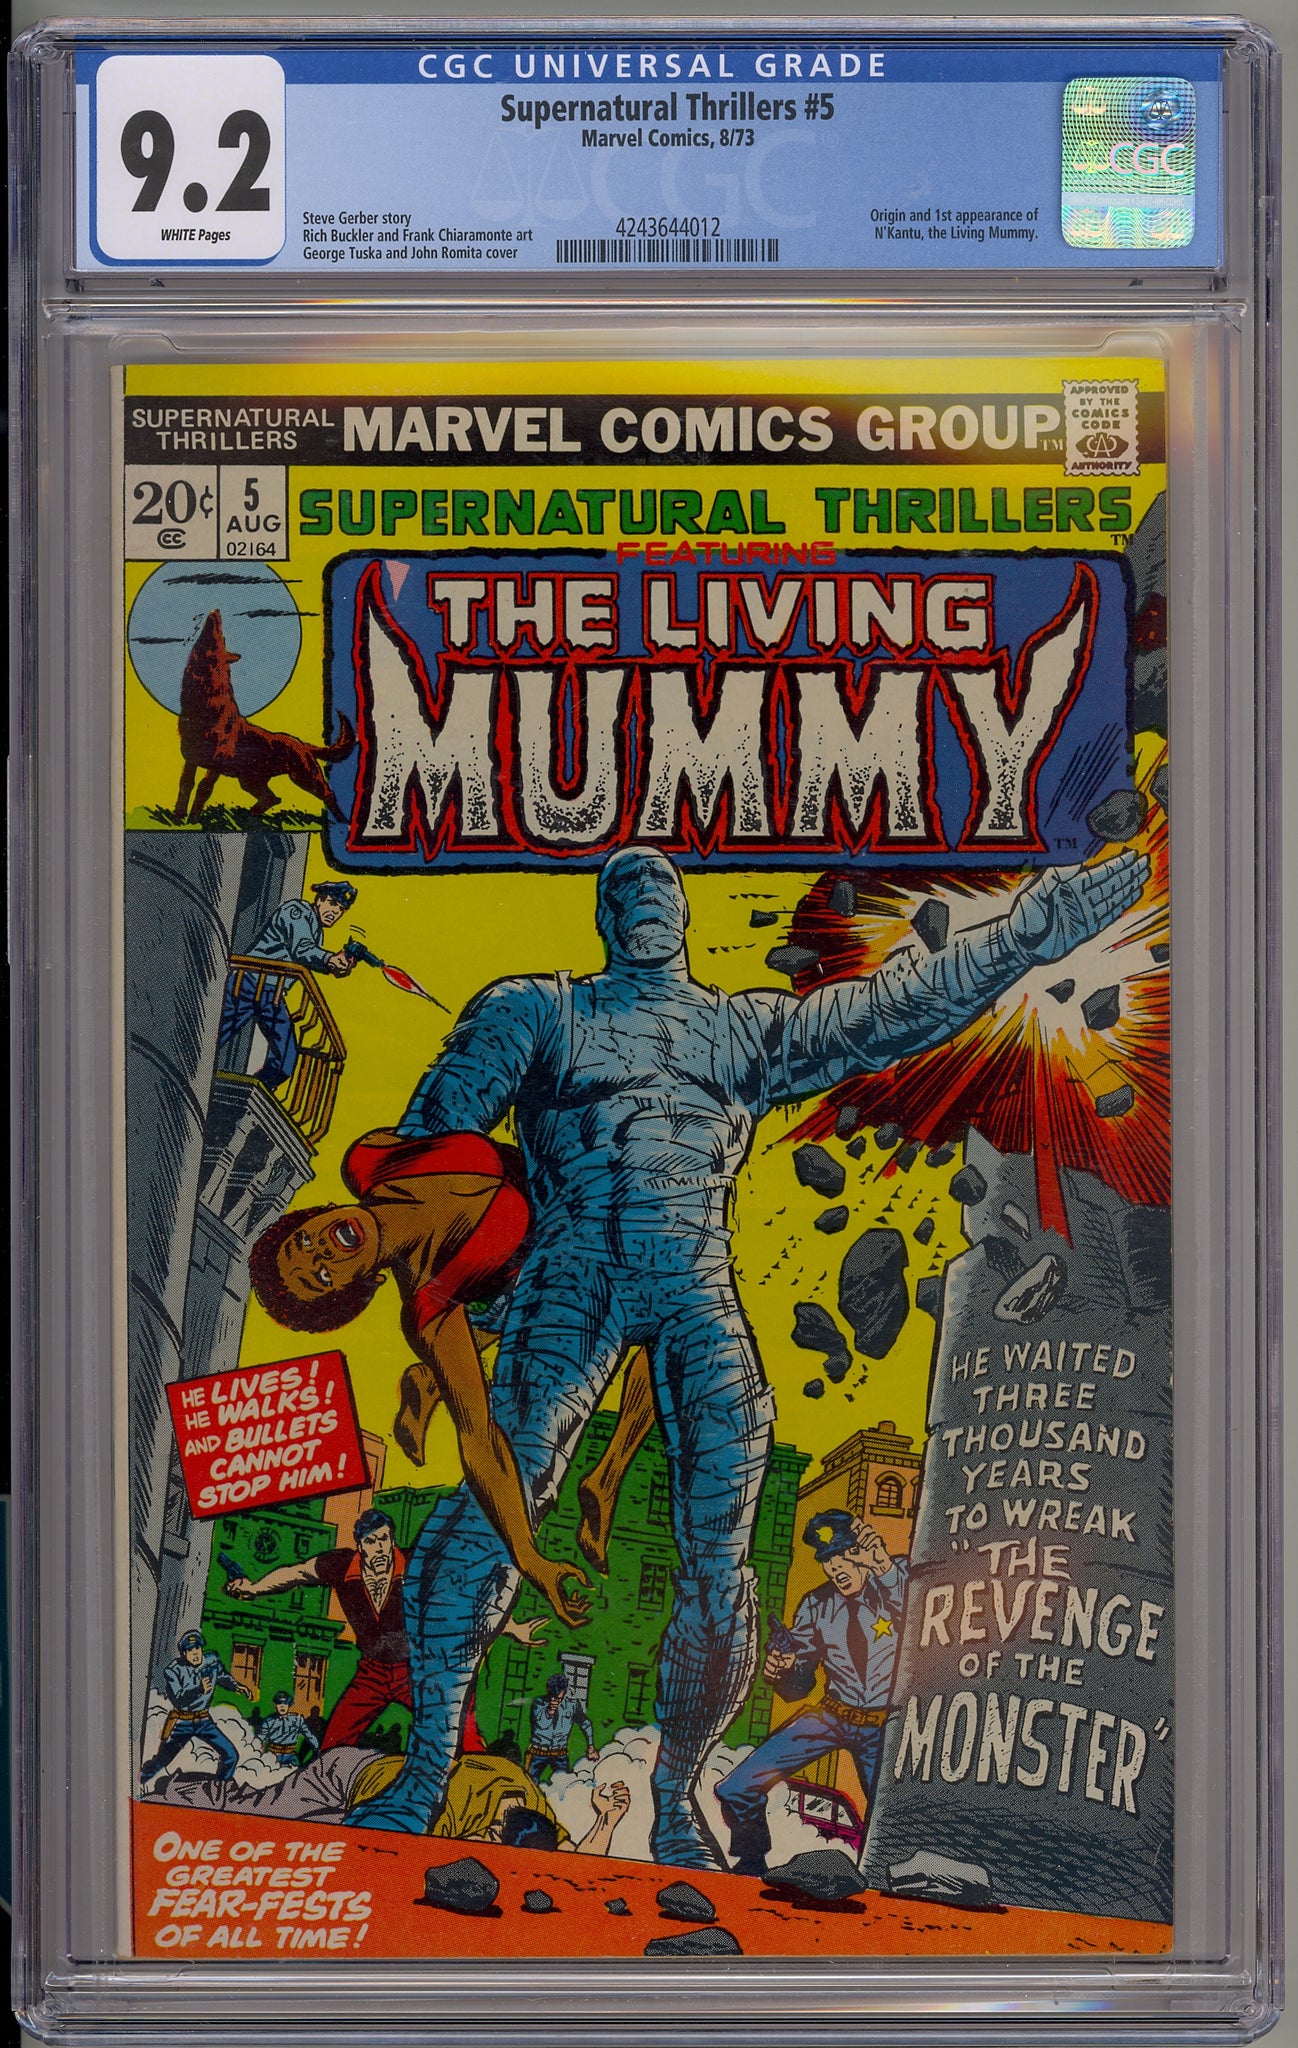 Supernatural Thrillers #5 (1973) The Living Mummy